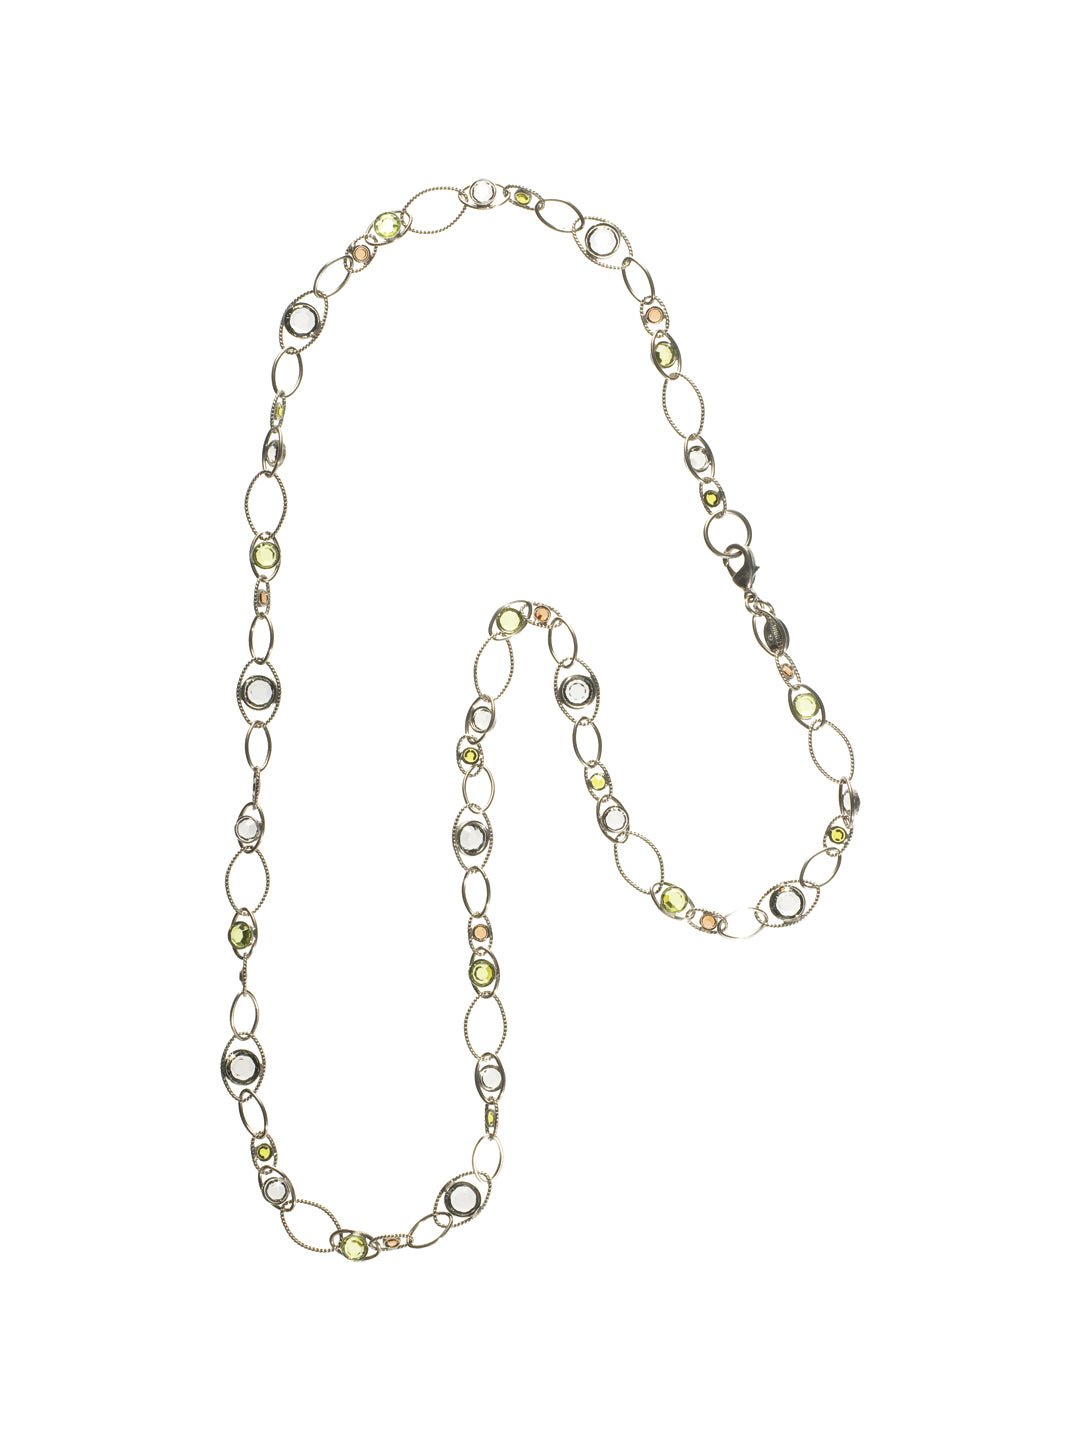 Crystal and Chain Linked Long Strand Necklace Long Necklace - NCG4ASCJ